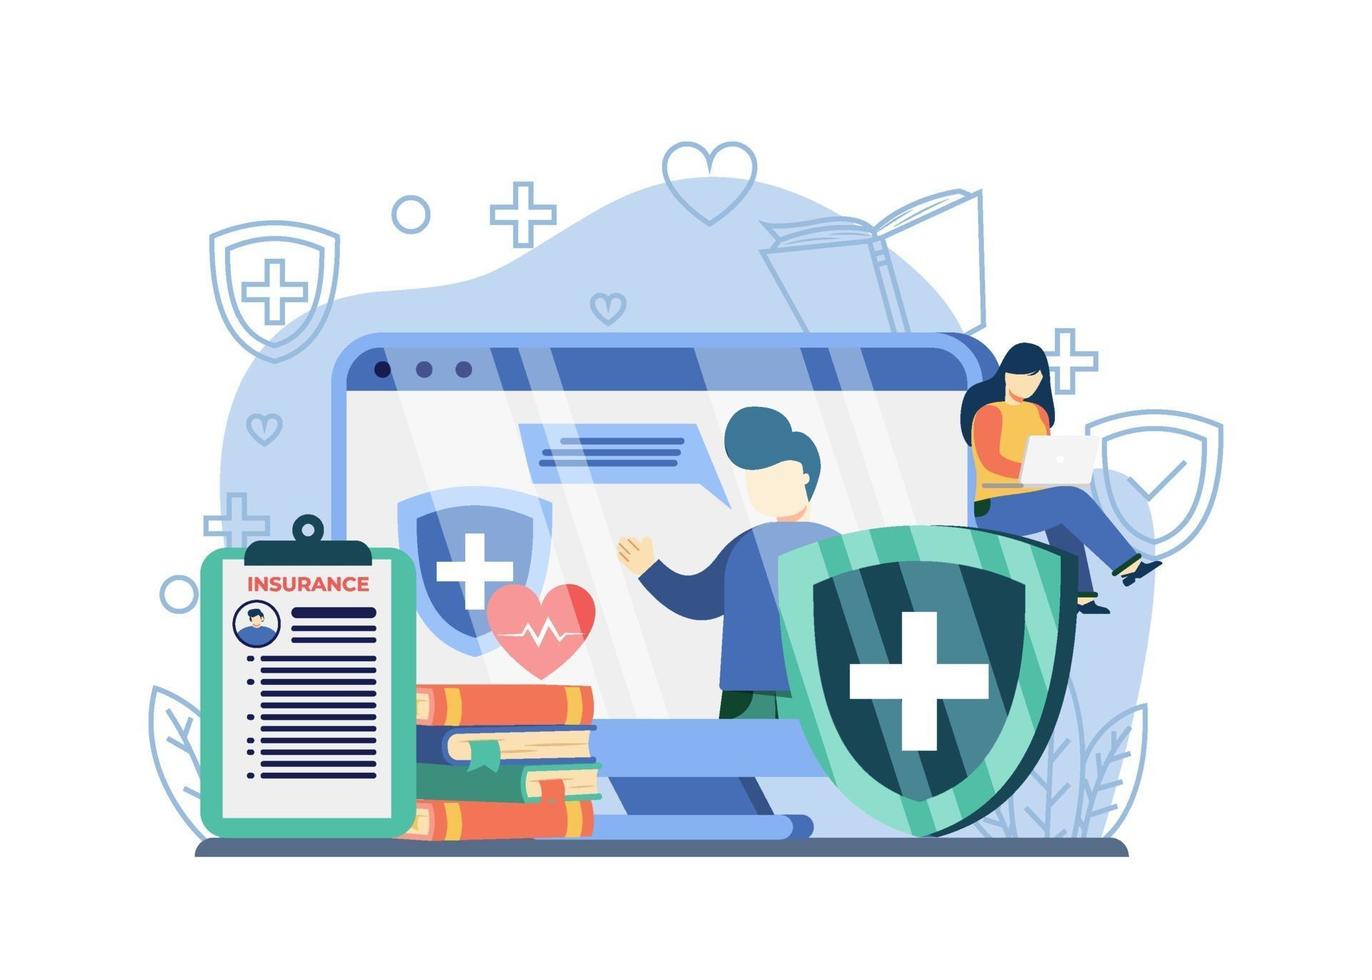 health care online webinars. woman sit on medical shield watch online webinars. online webinars, online courses, training, insurance. can be used for landing pages, web, banners, templates. vector